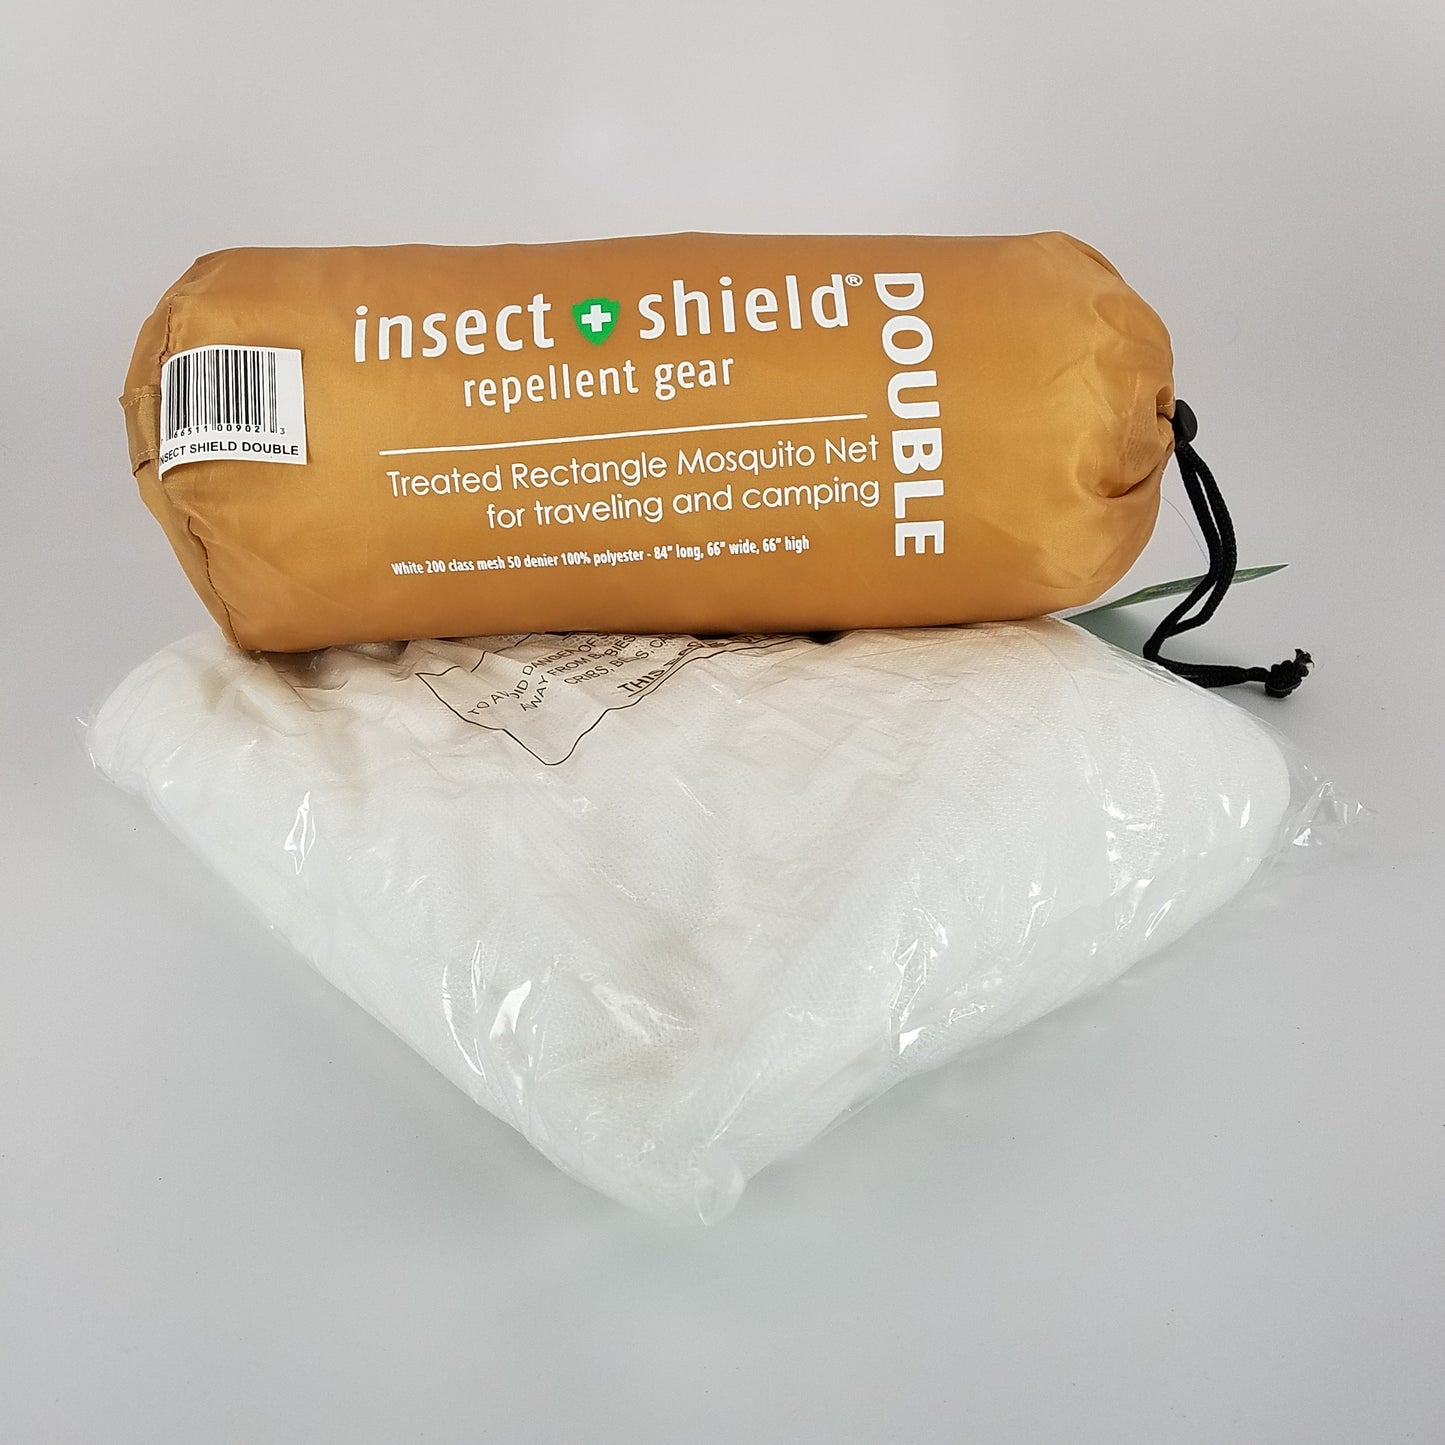 Gadabout Double Treated w/ Insect Shield White 196 mesh 50 Denier Rectangular Mosquito Net w/ Carry bag